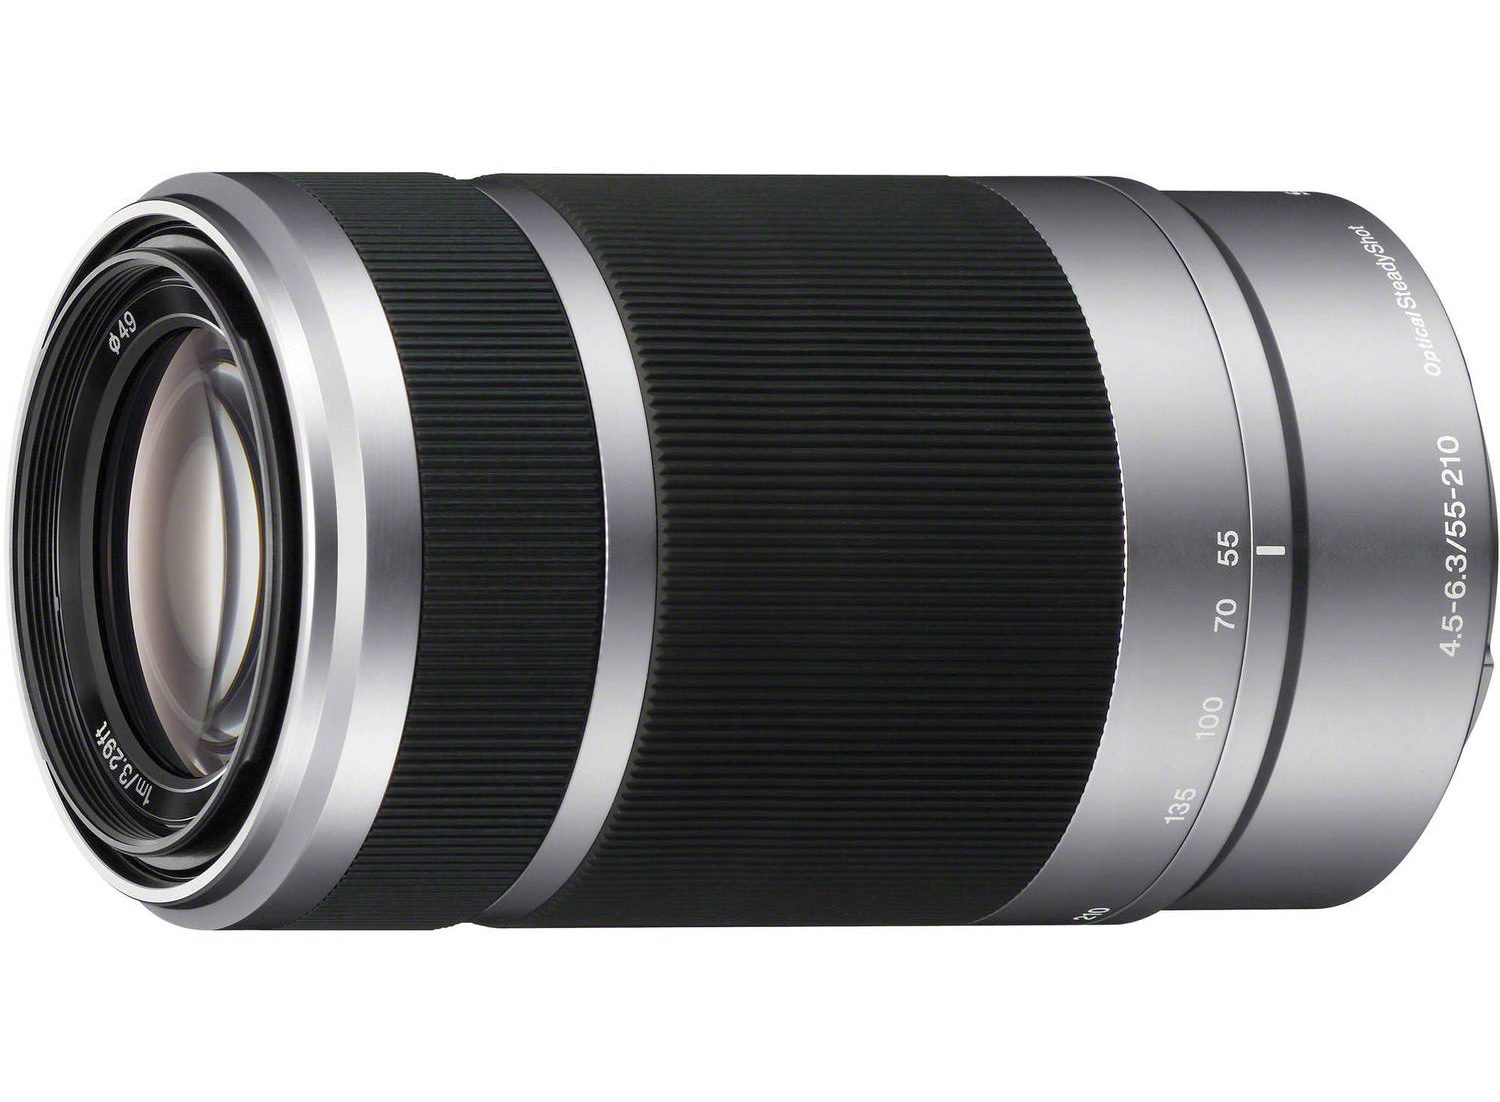 My Sony E-mount 55-210mm f/4.5-6.3 OSS Lens | Hands on Review